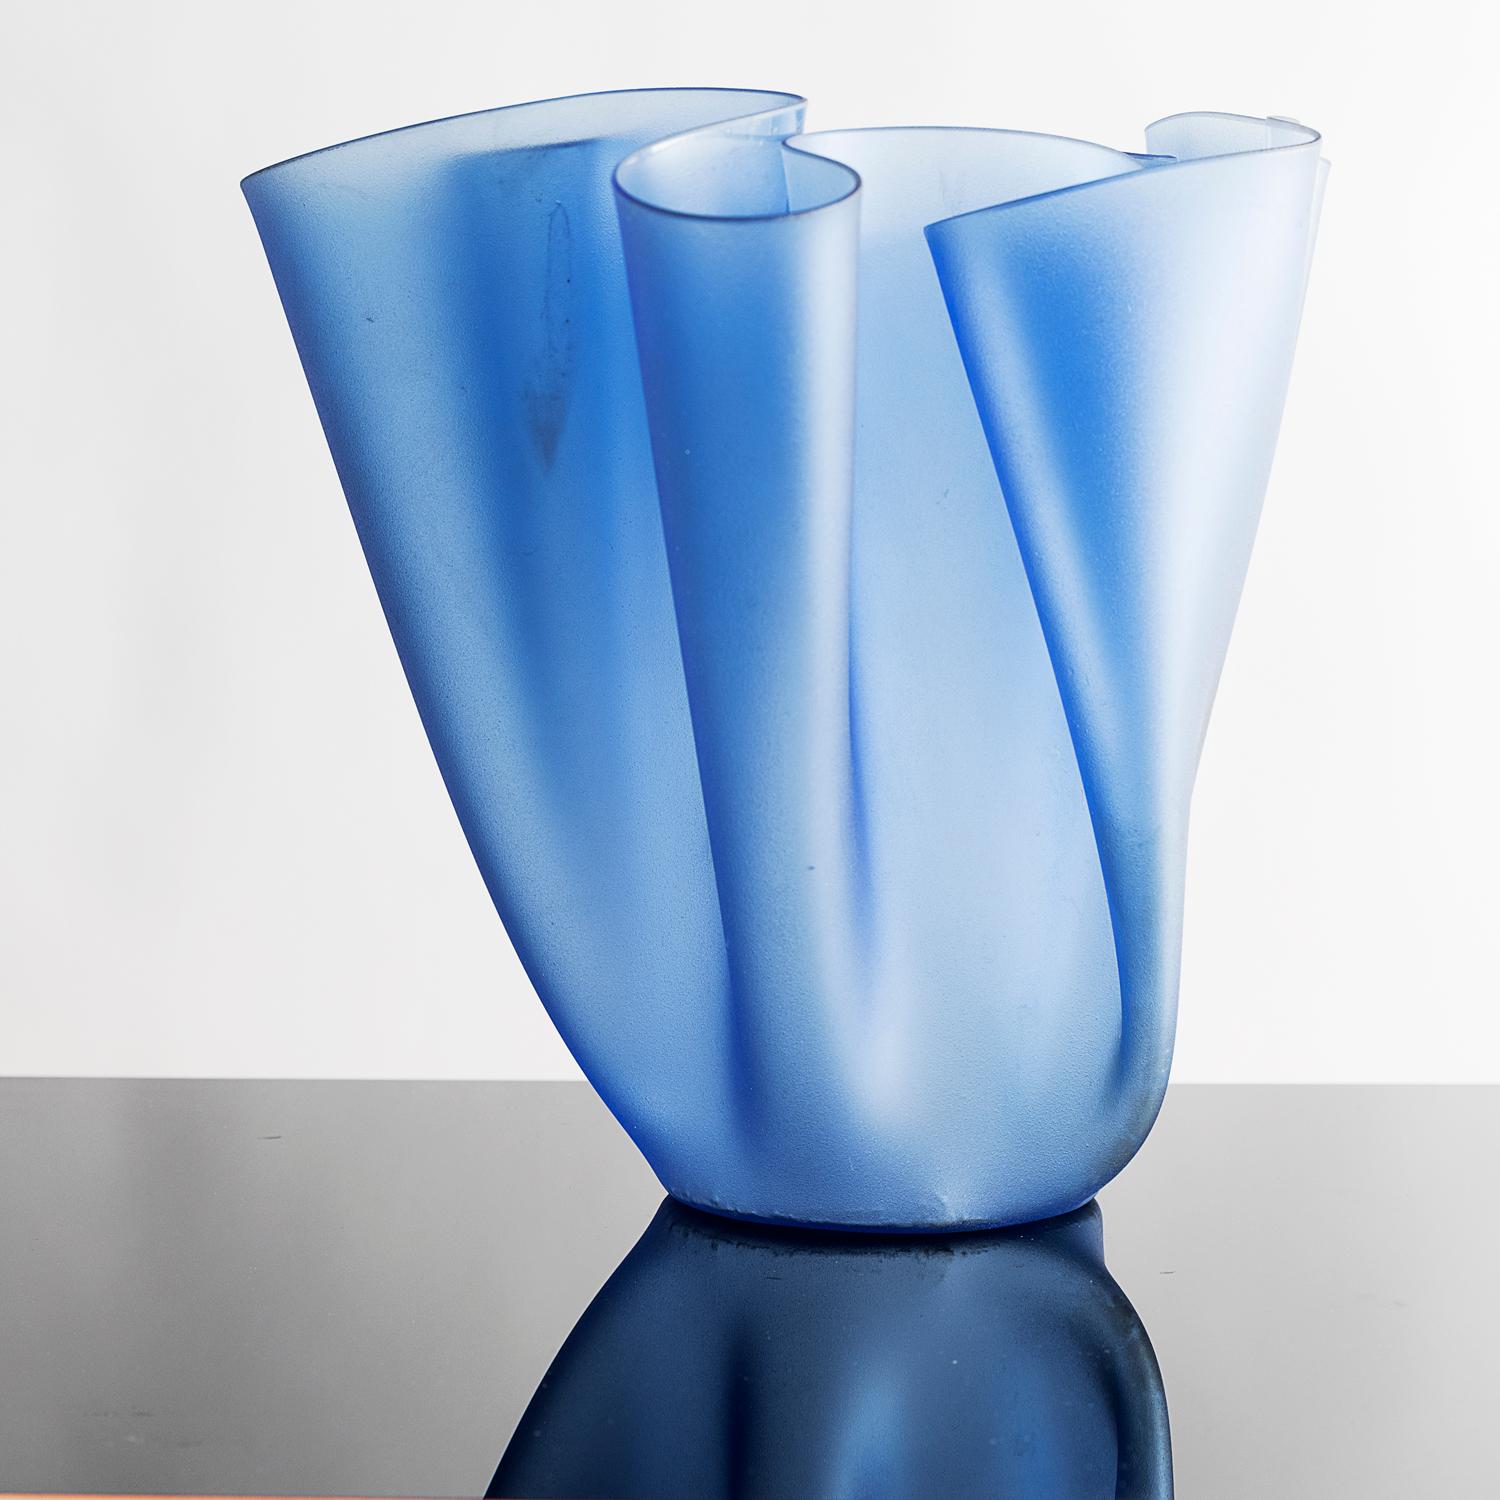 Two vintage glass Cartoccio vases design in 1935 by Pietro Chiesa and manufactured by Fontana Arte, the illustrated examples have been produced in the 1950s. The vases are in good condition and could be sold separately by splitting the listed price